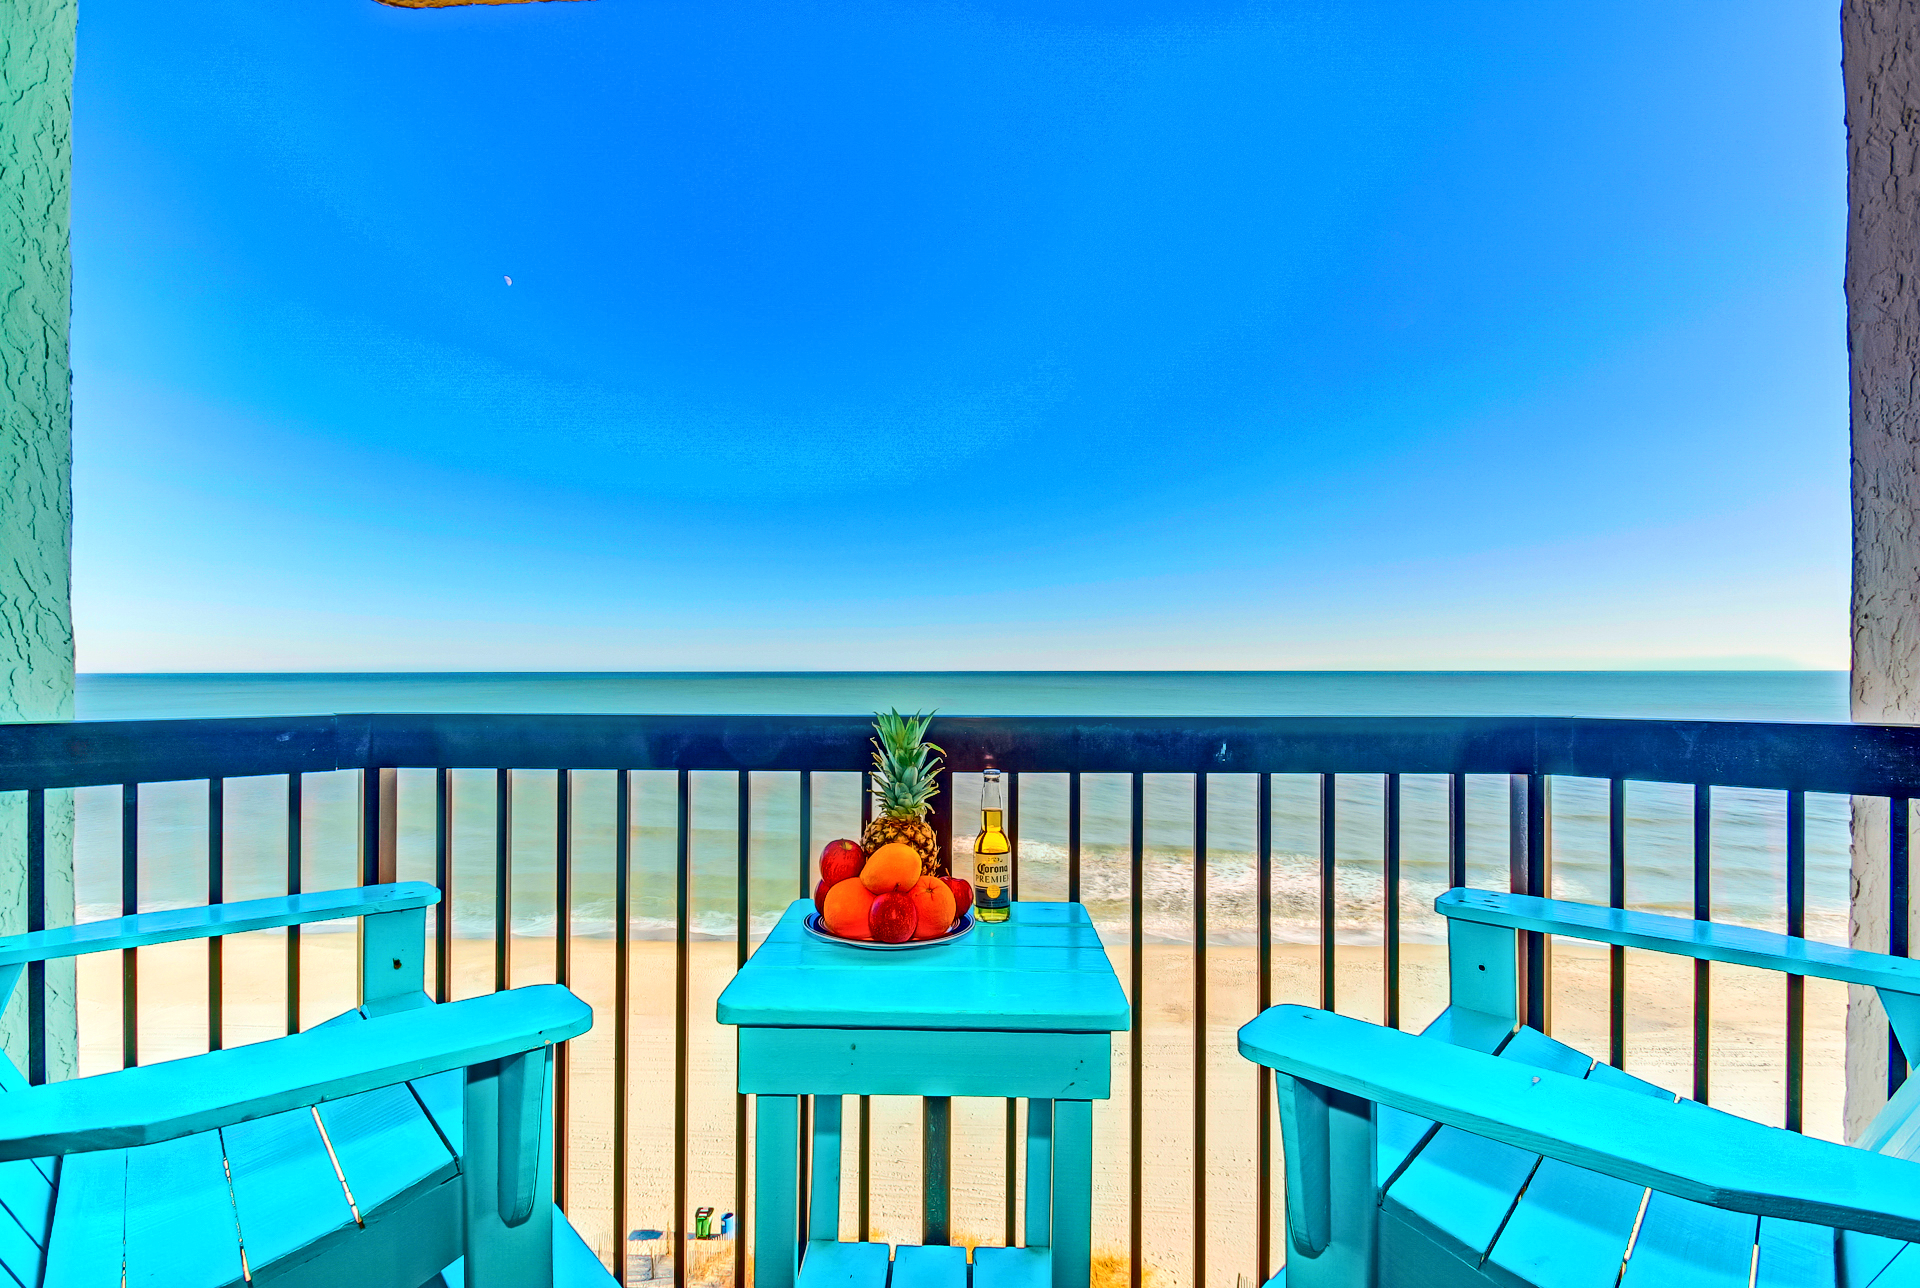 A fruit bowl and drink on a teal balcony table